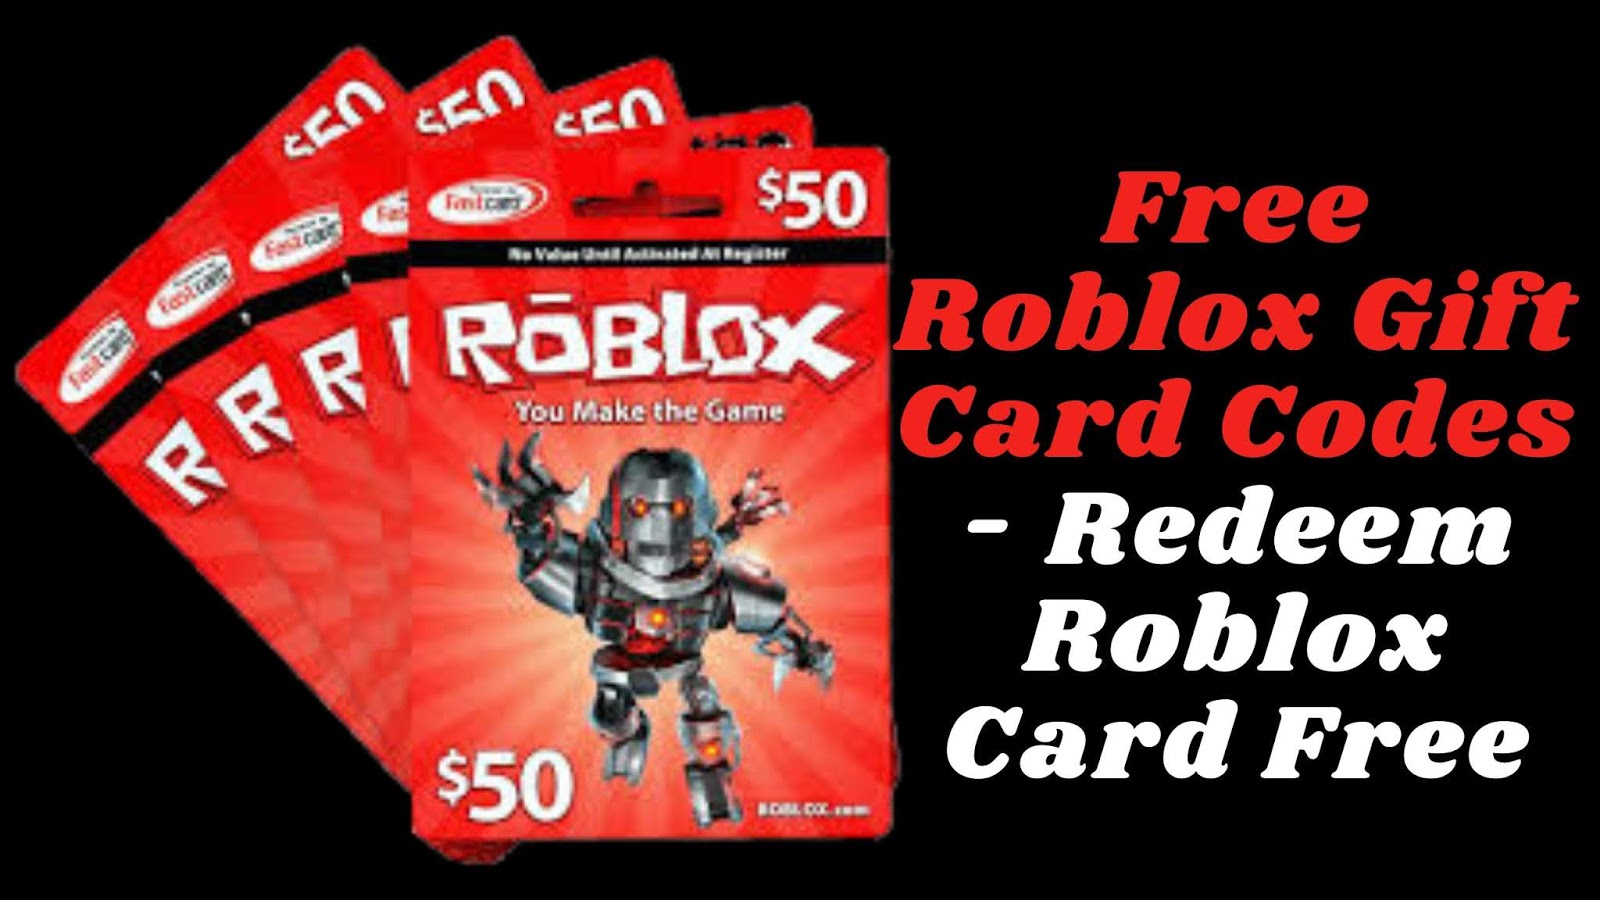 Free Gift Cards Free Roblox Gift Card Codes Redeem Roblox Card Free - roblox code redeem gifts